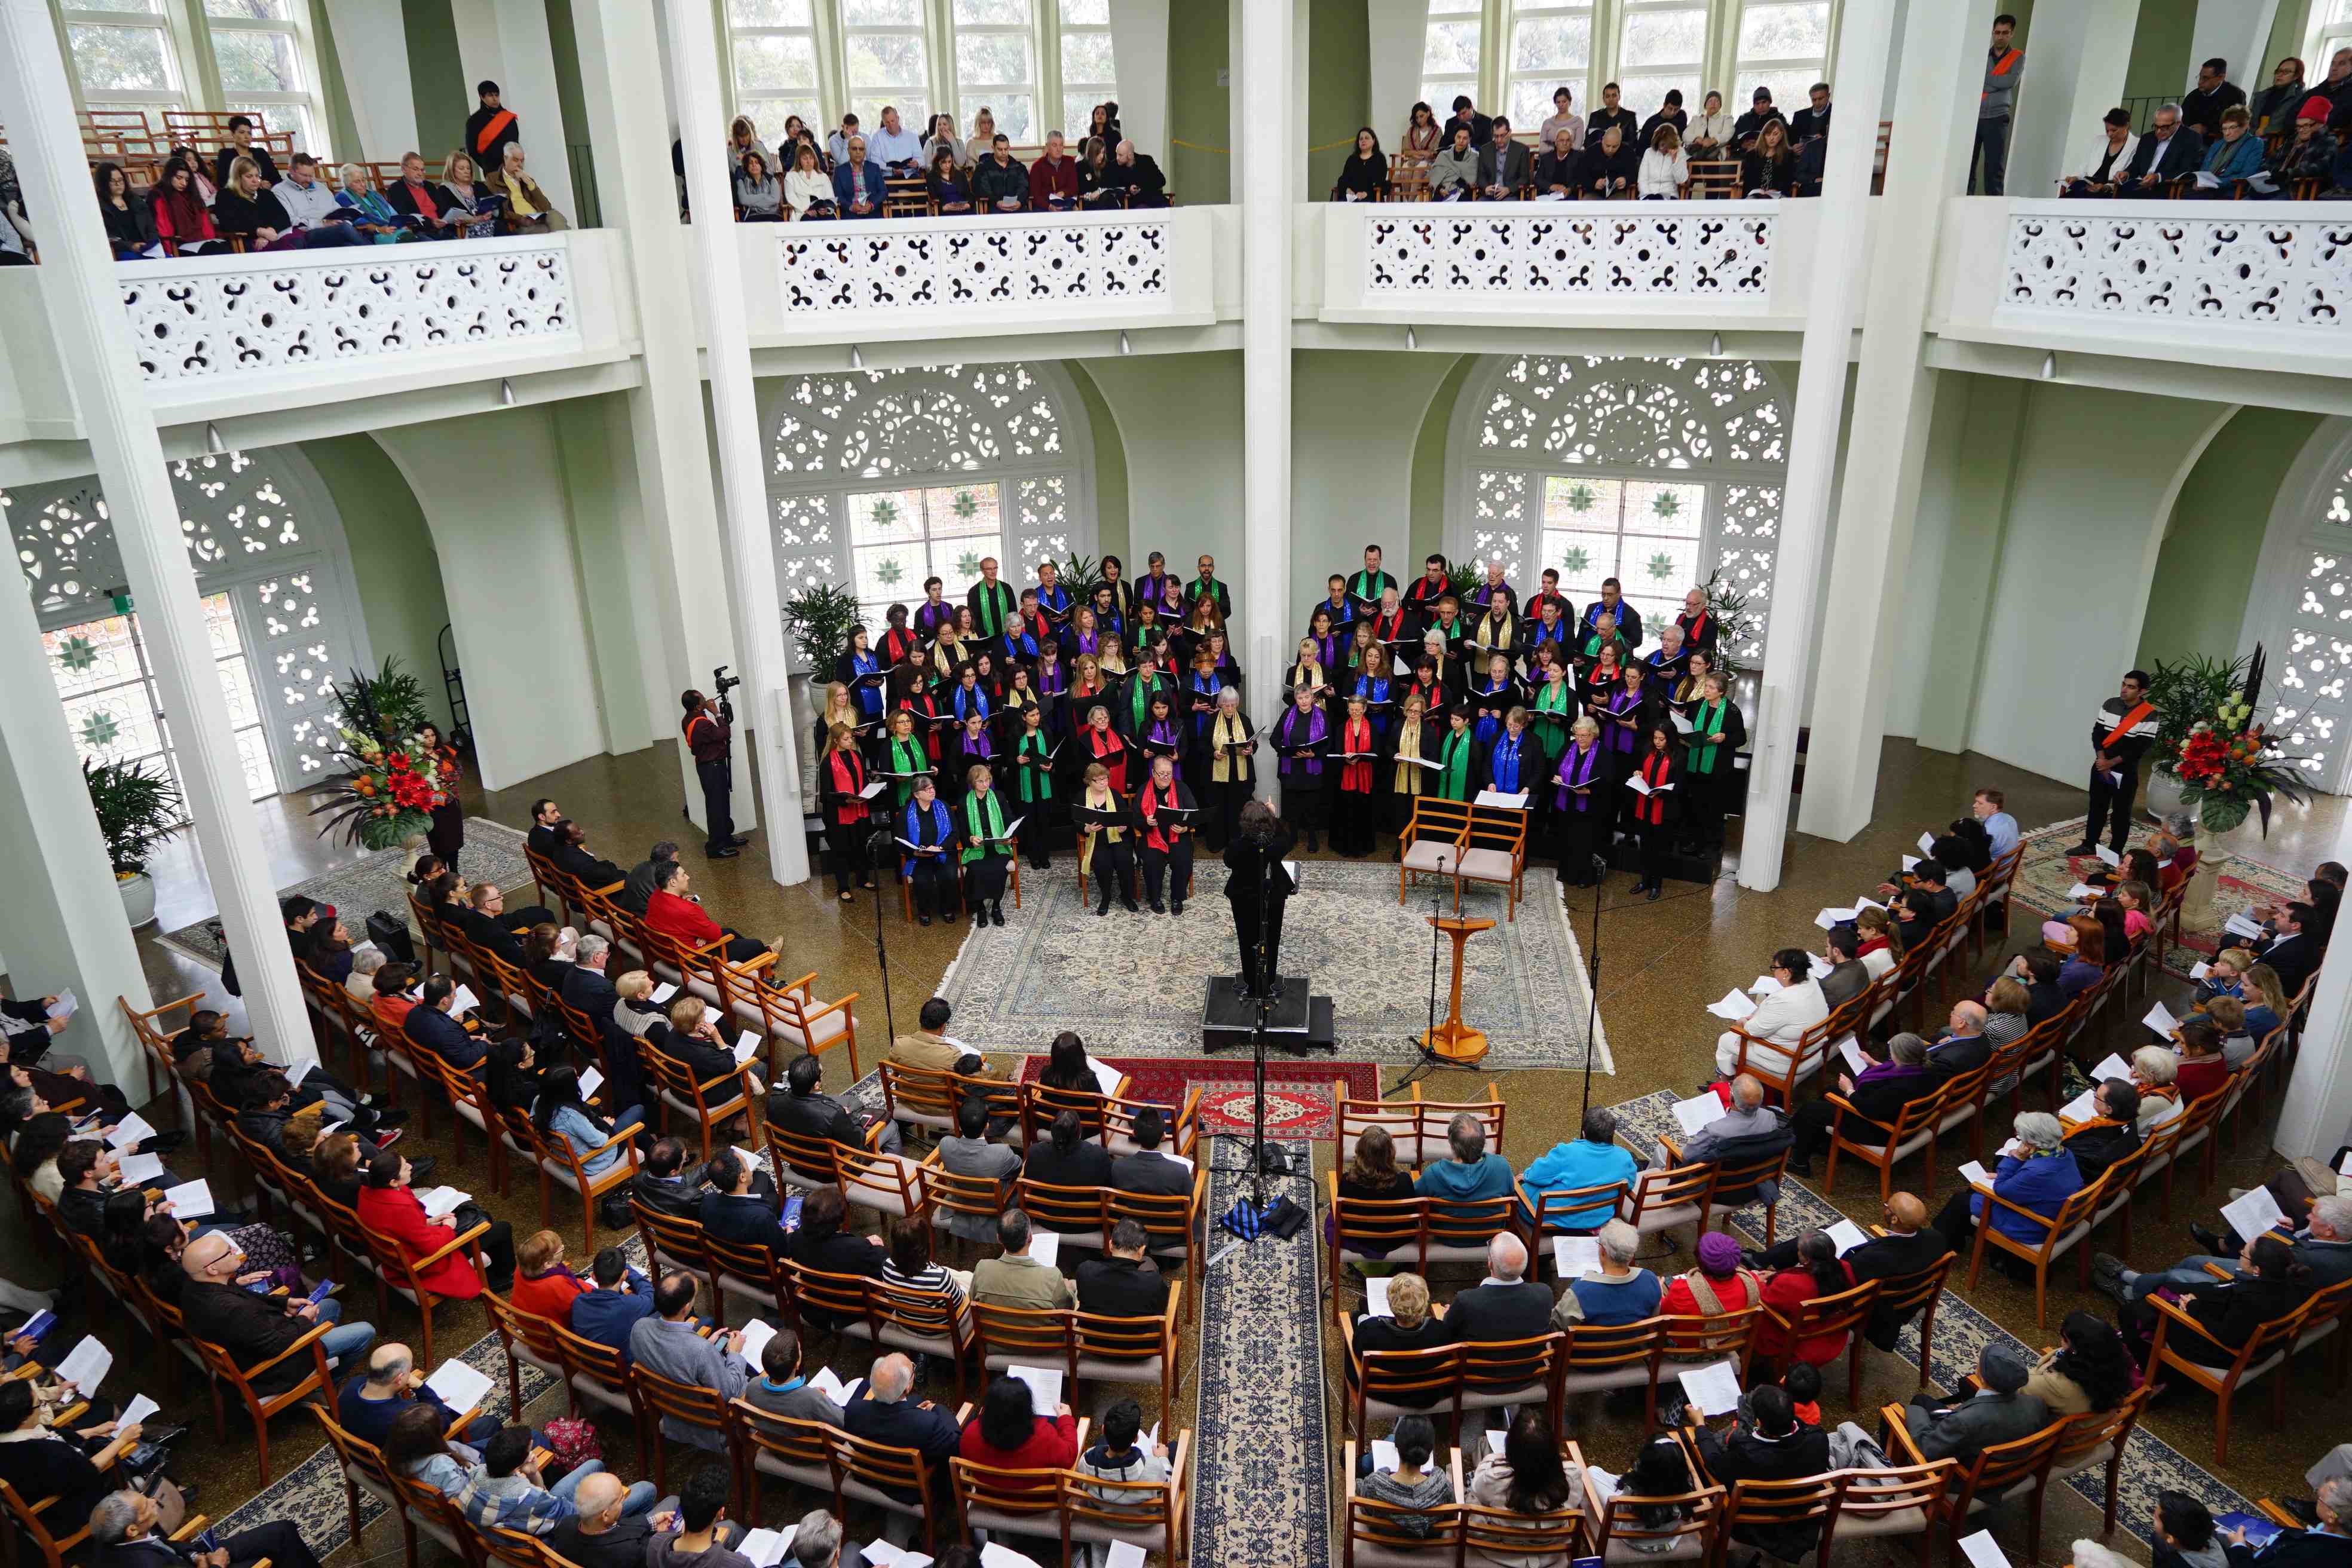 Festival choir uplifts as voices soar into Temple dome